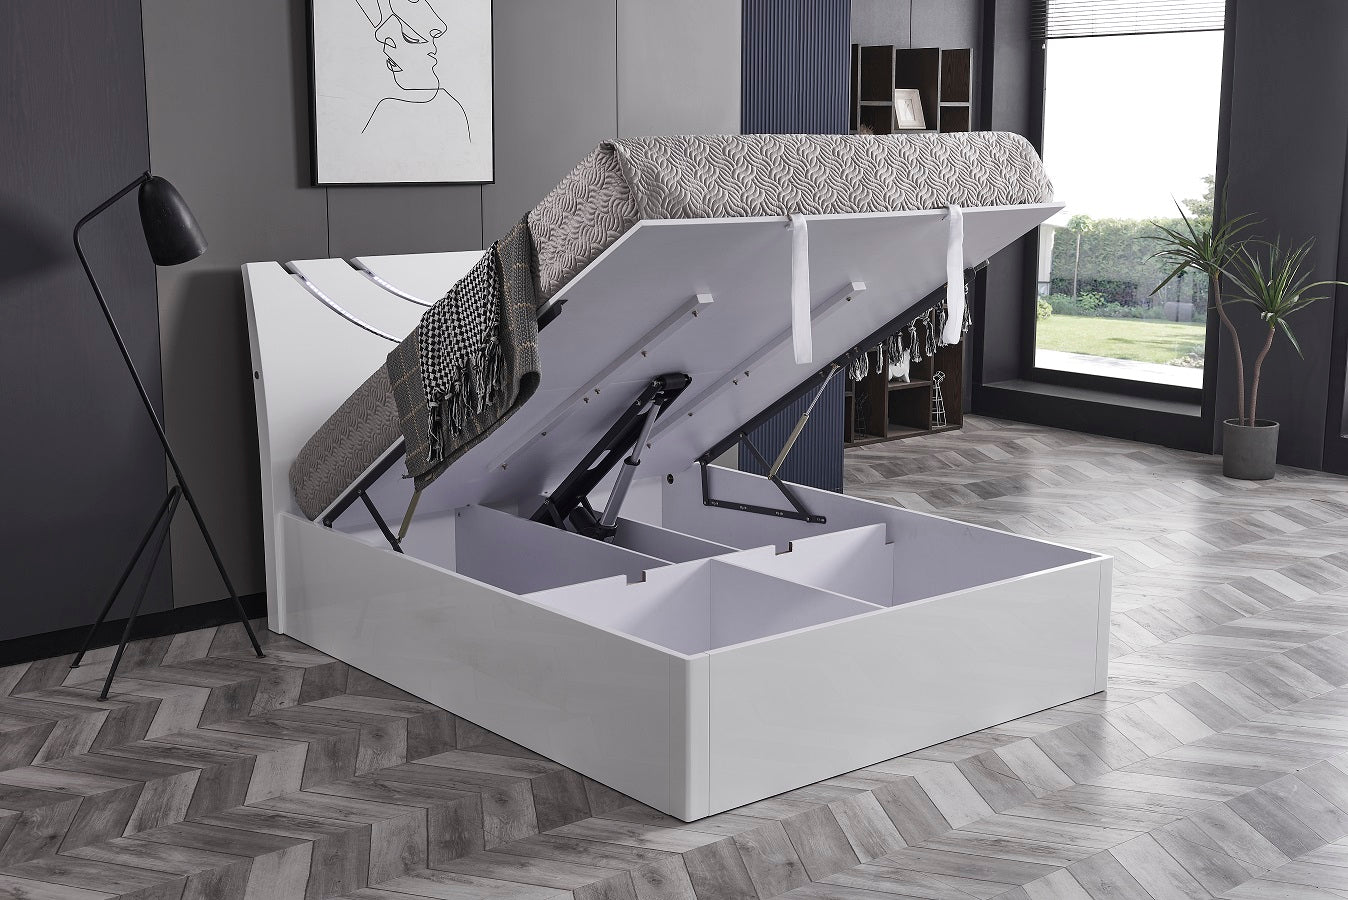 Modern storage bed in white color